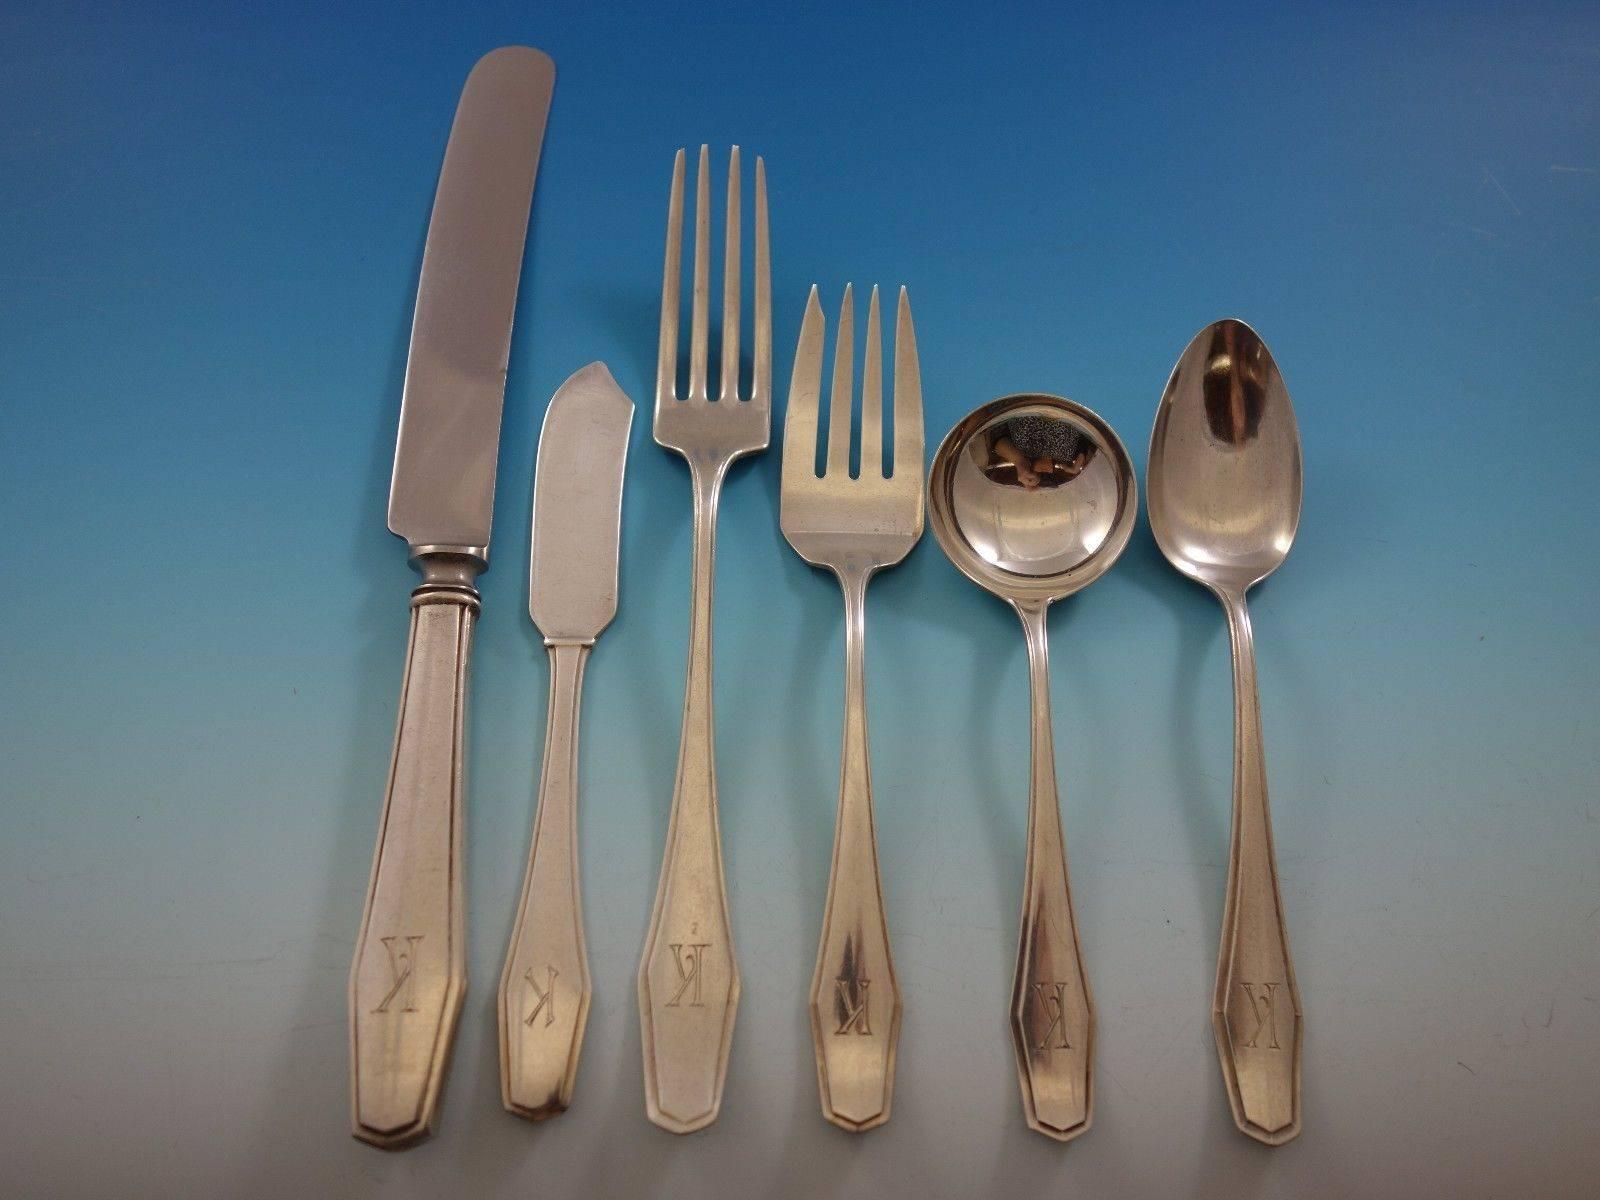 Hampton by Alvin sterling silver Flatware set, 55 pieces. This set includes: 8 Knives, 8 7/8